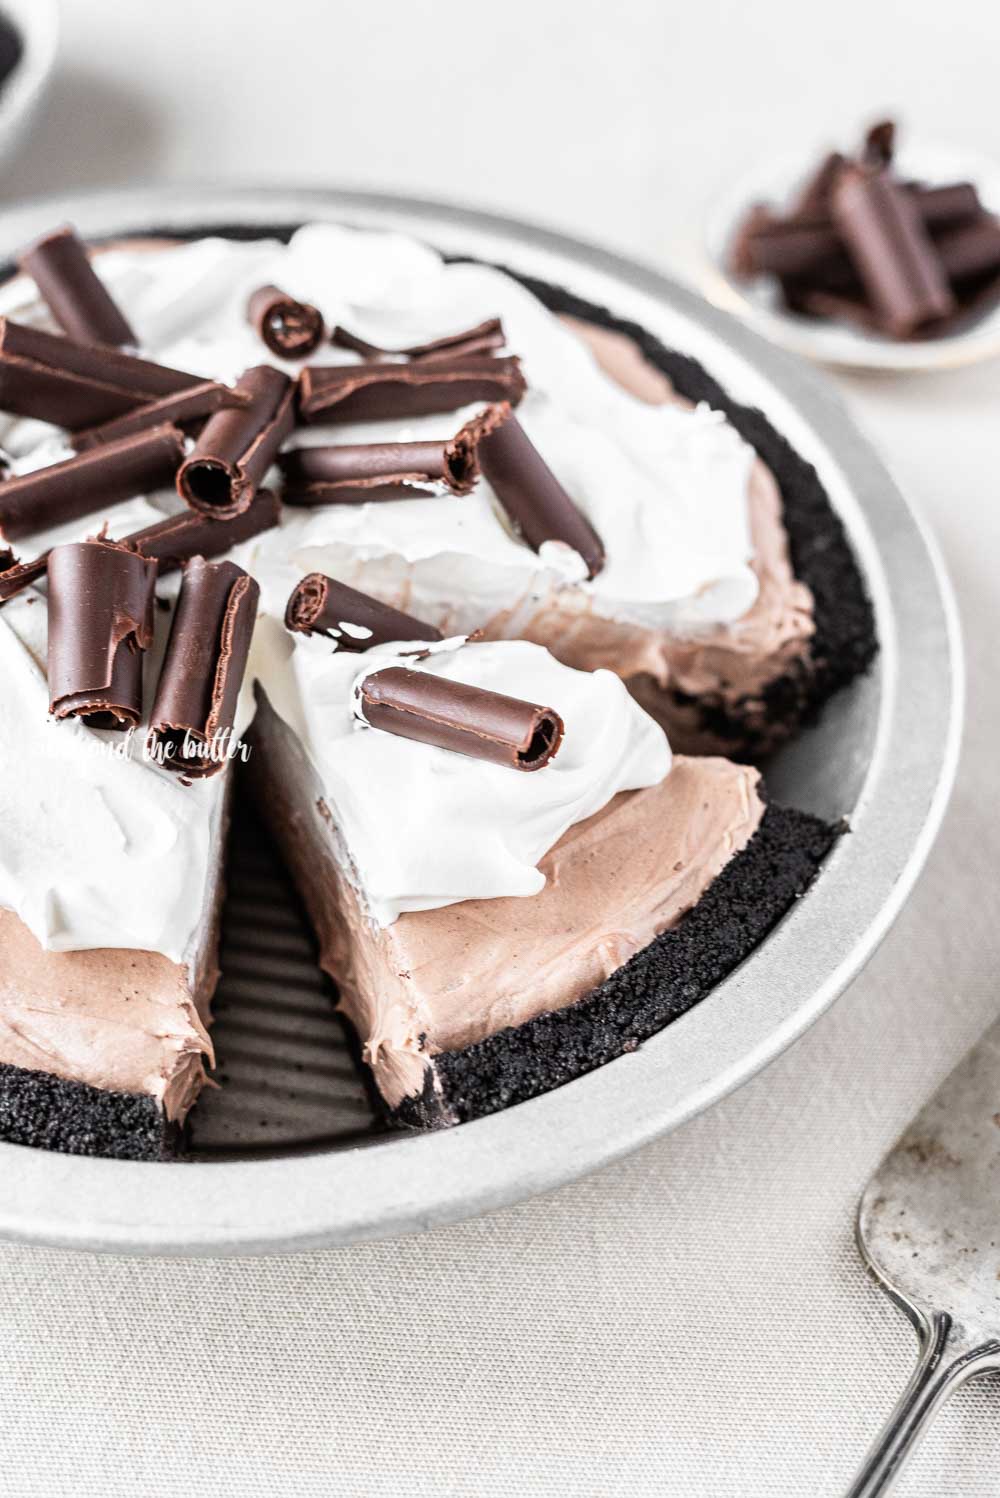 Angled image of sliced no-bake chocolate cream pie with chocolate wafer crust and garnished with Cool Whip and chocolate curls.